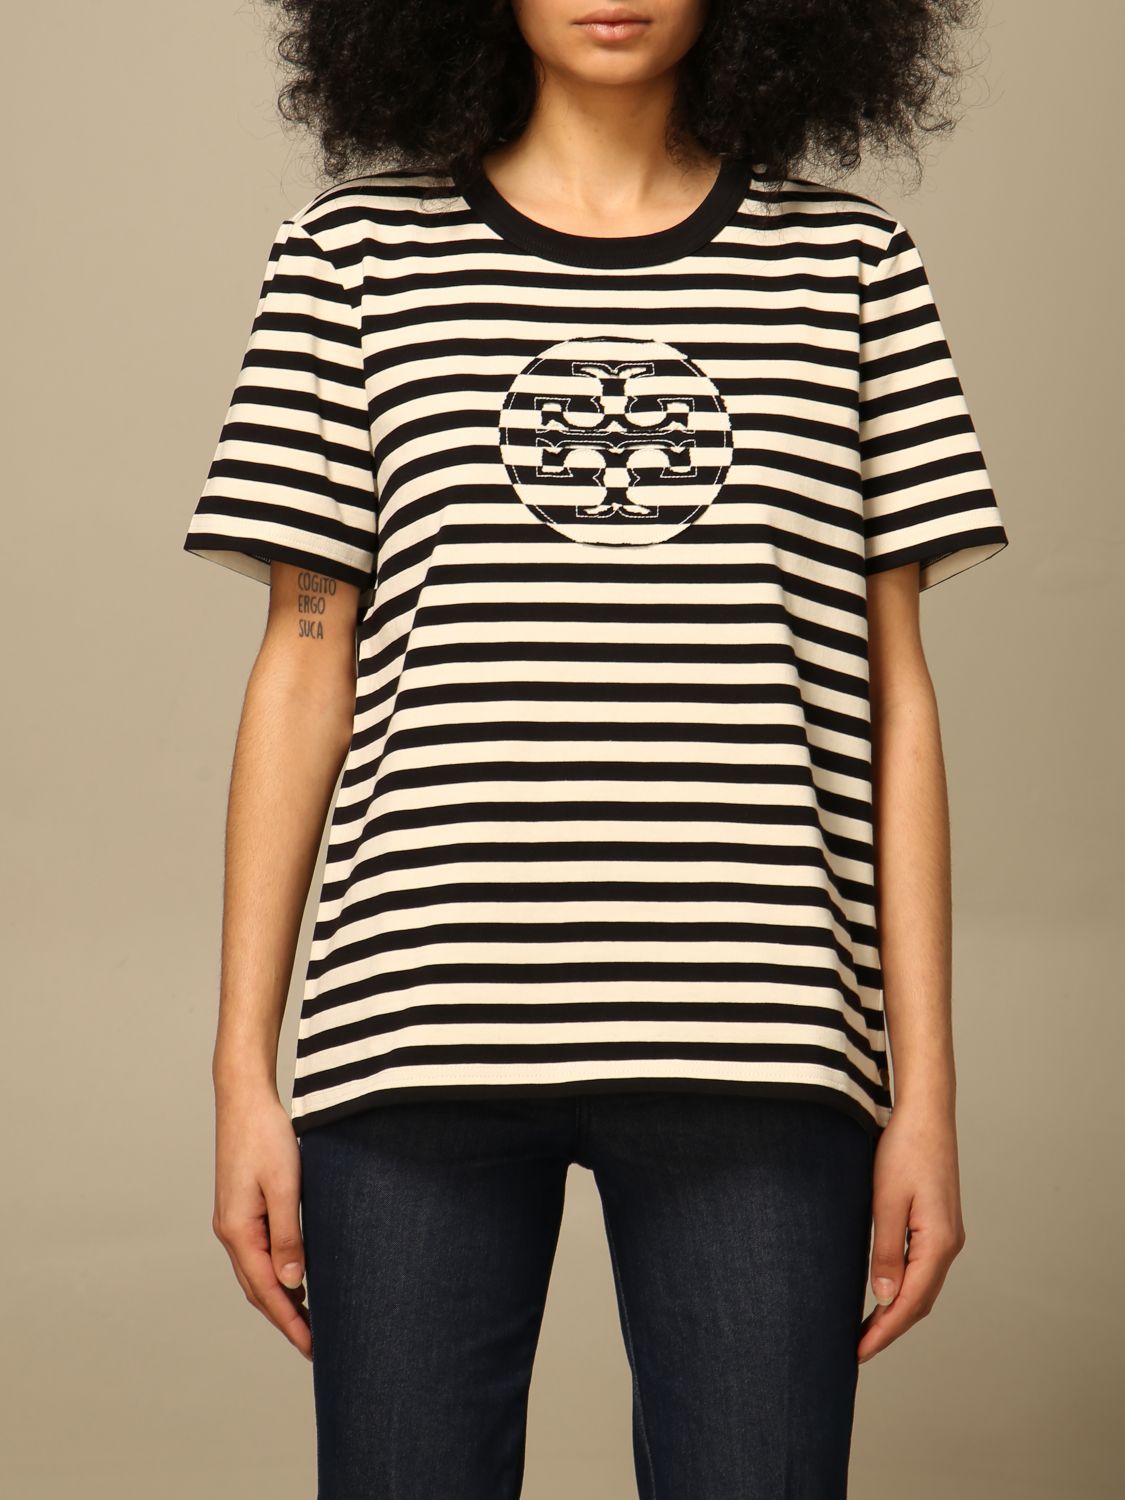 TORY BURCH: t-shirt in striped cotton with emblem - White | Tory Burch t- shirt 63871 online on 